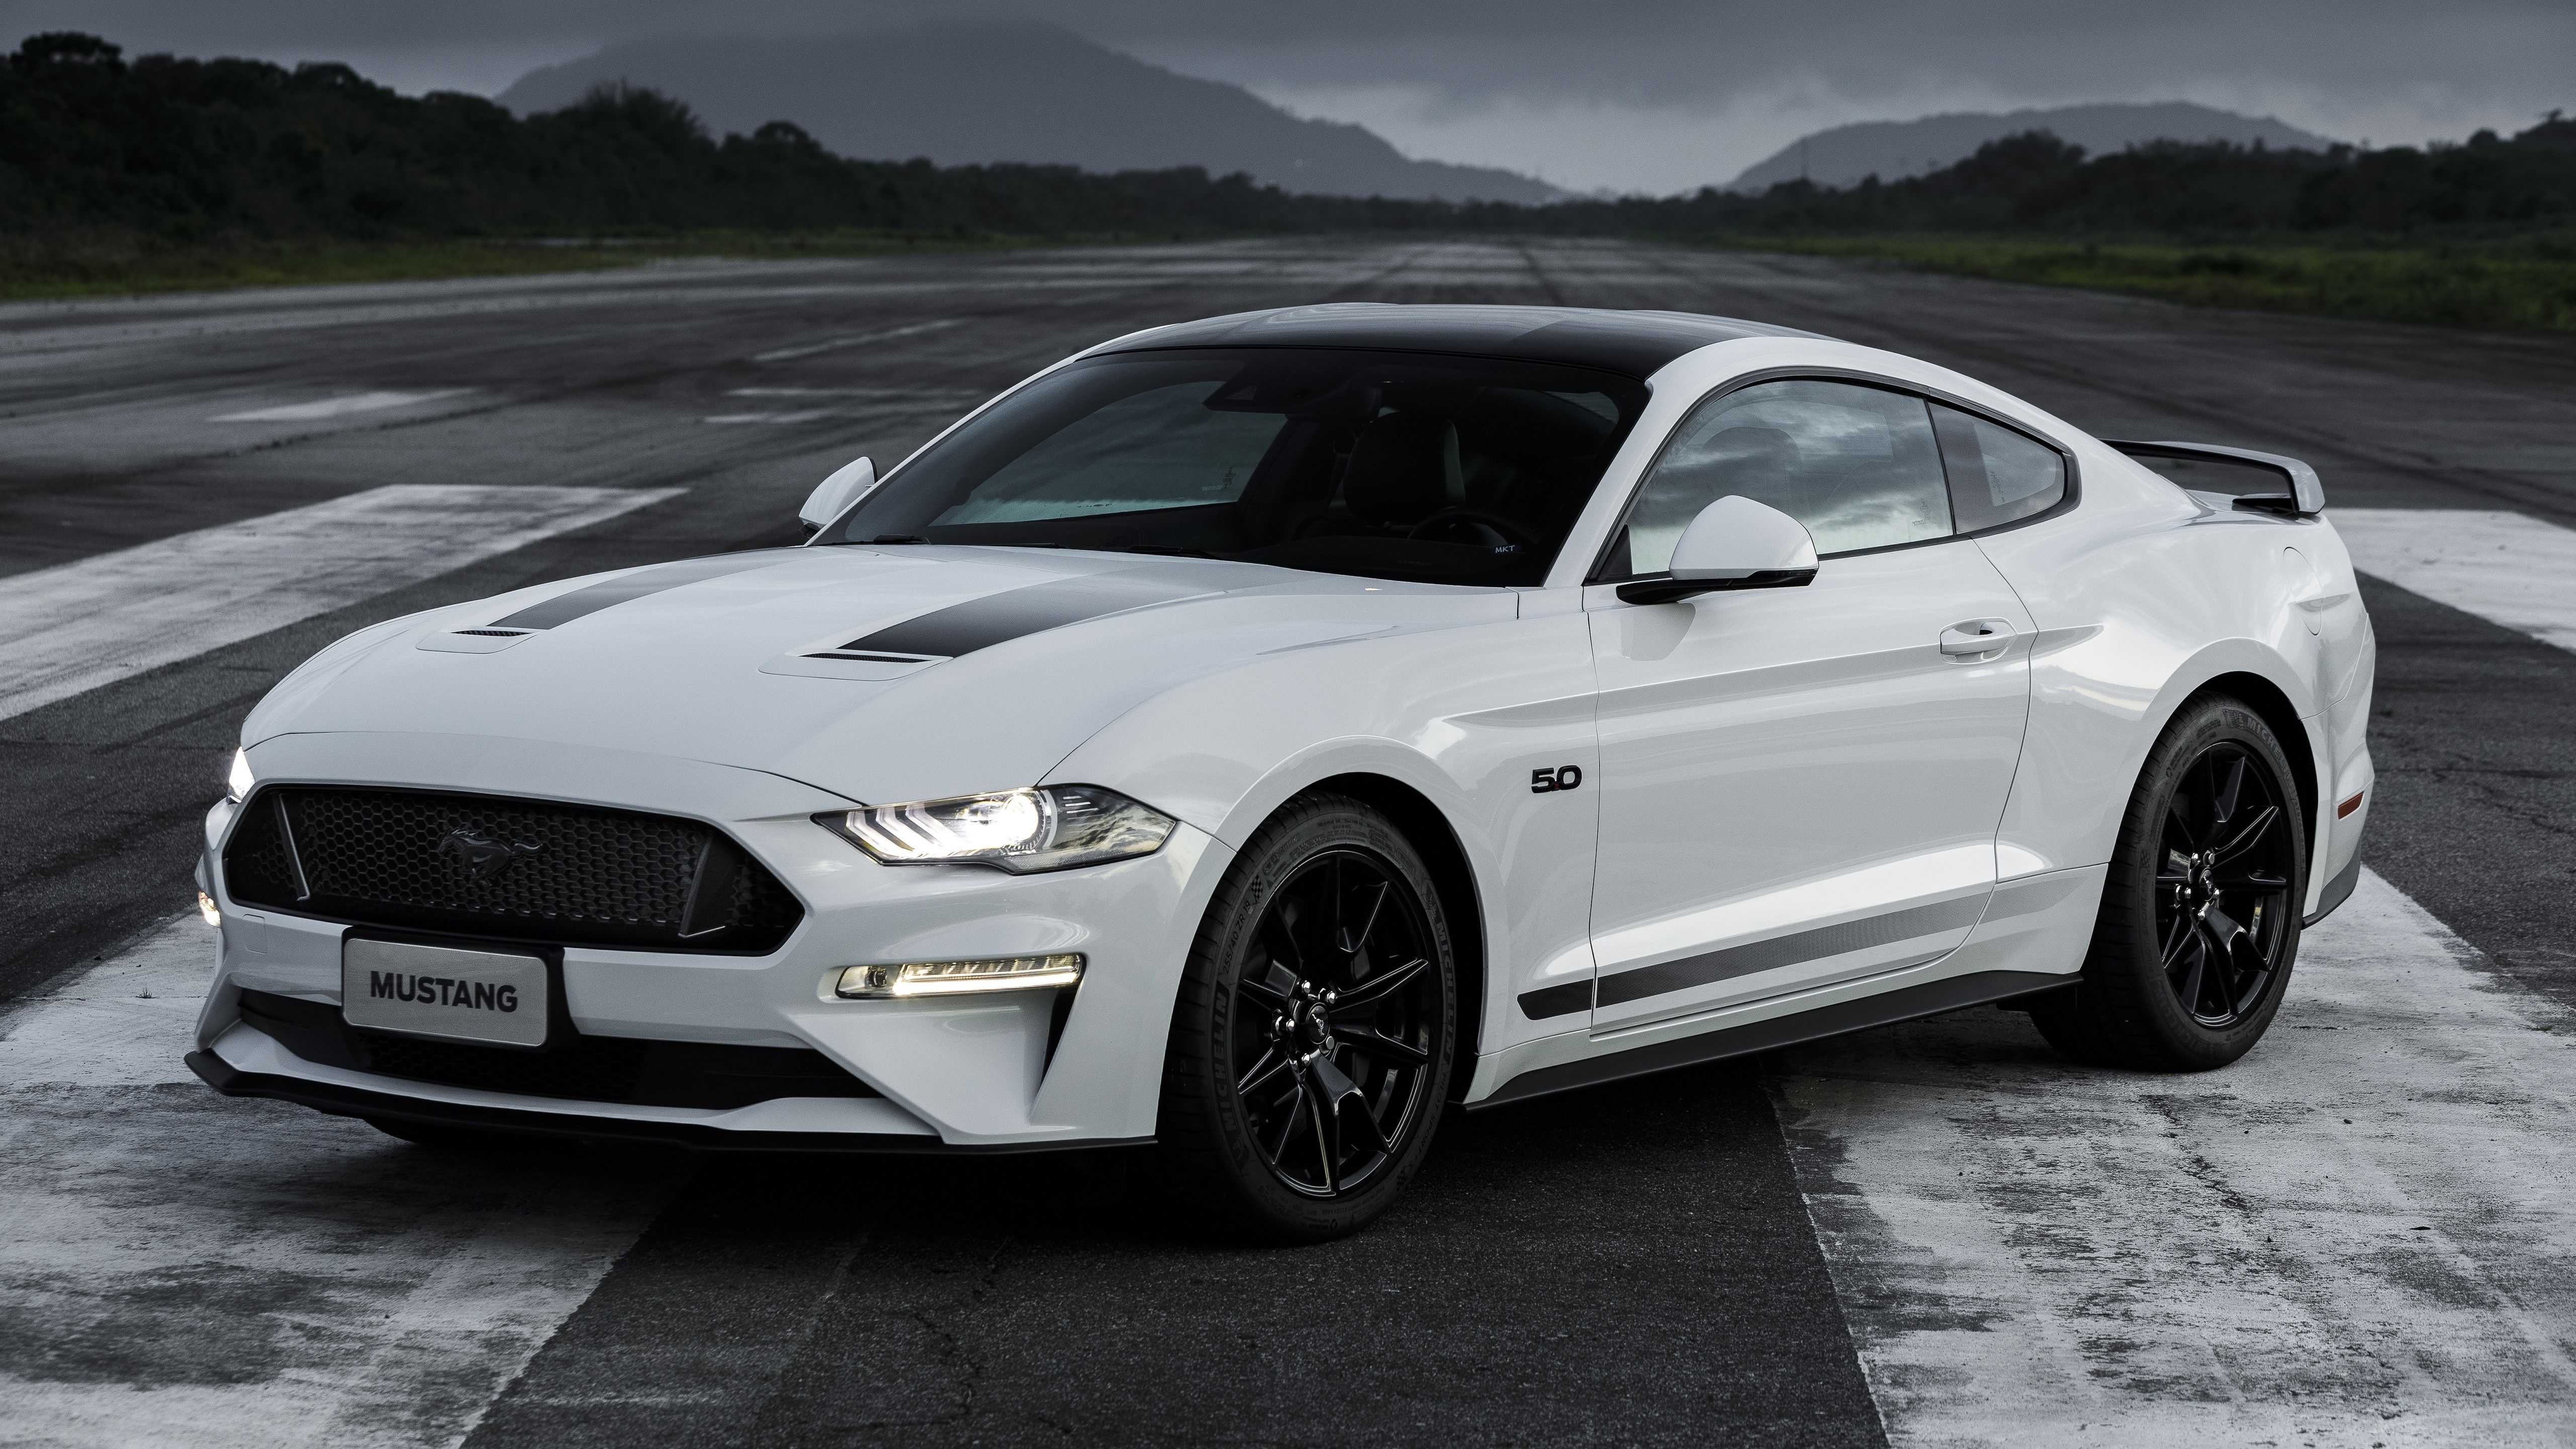 Ford Mustang GT Black Shadow white car on the road wallpaper and image, picture, photo